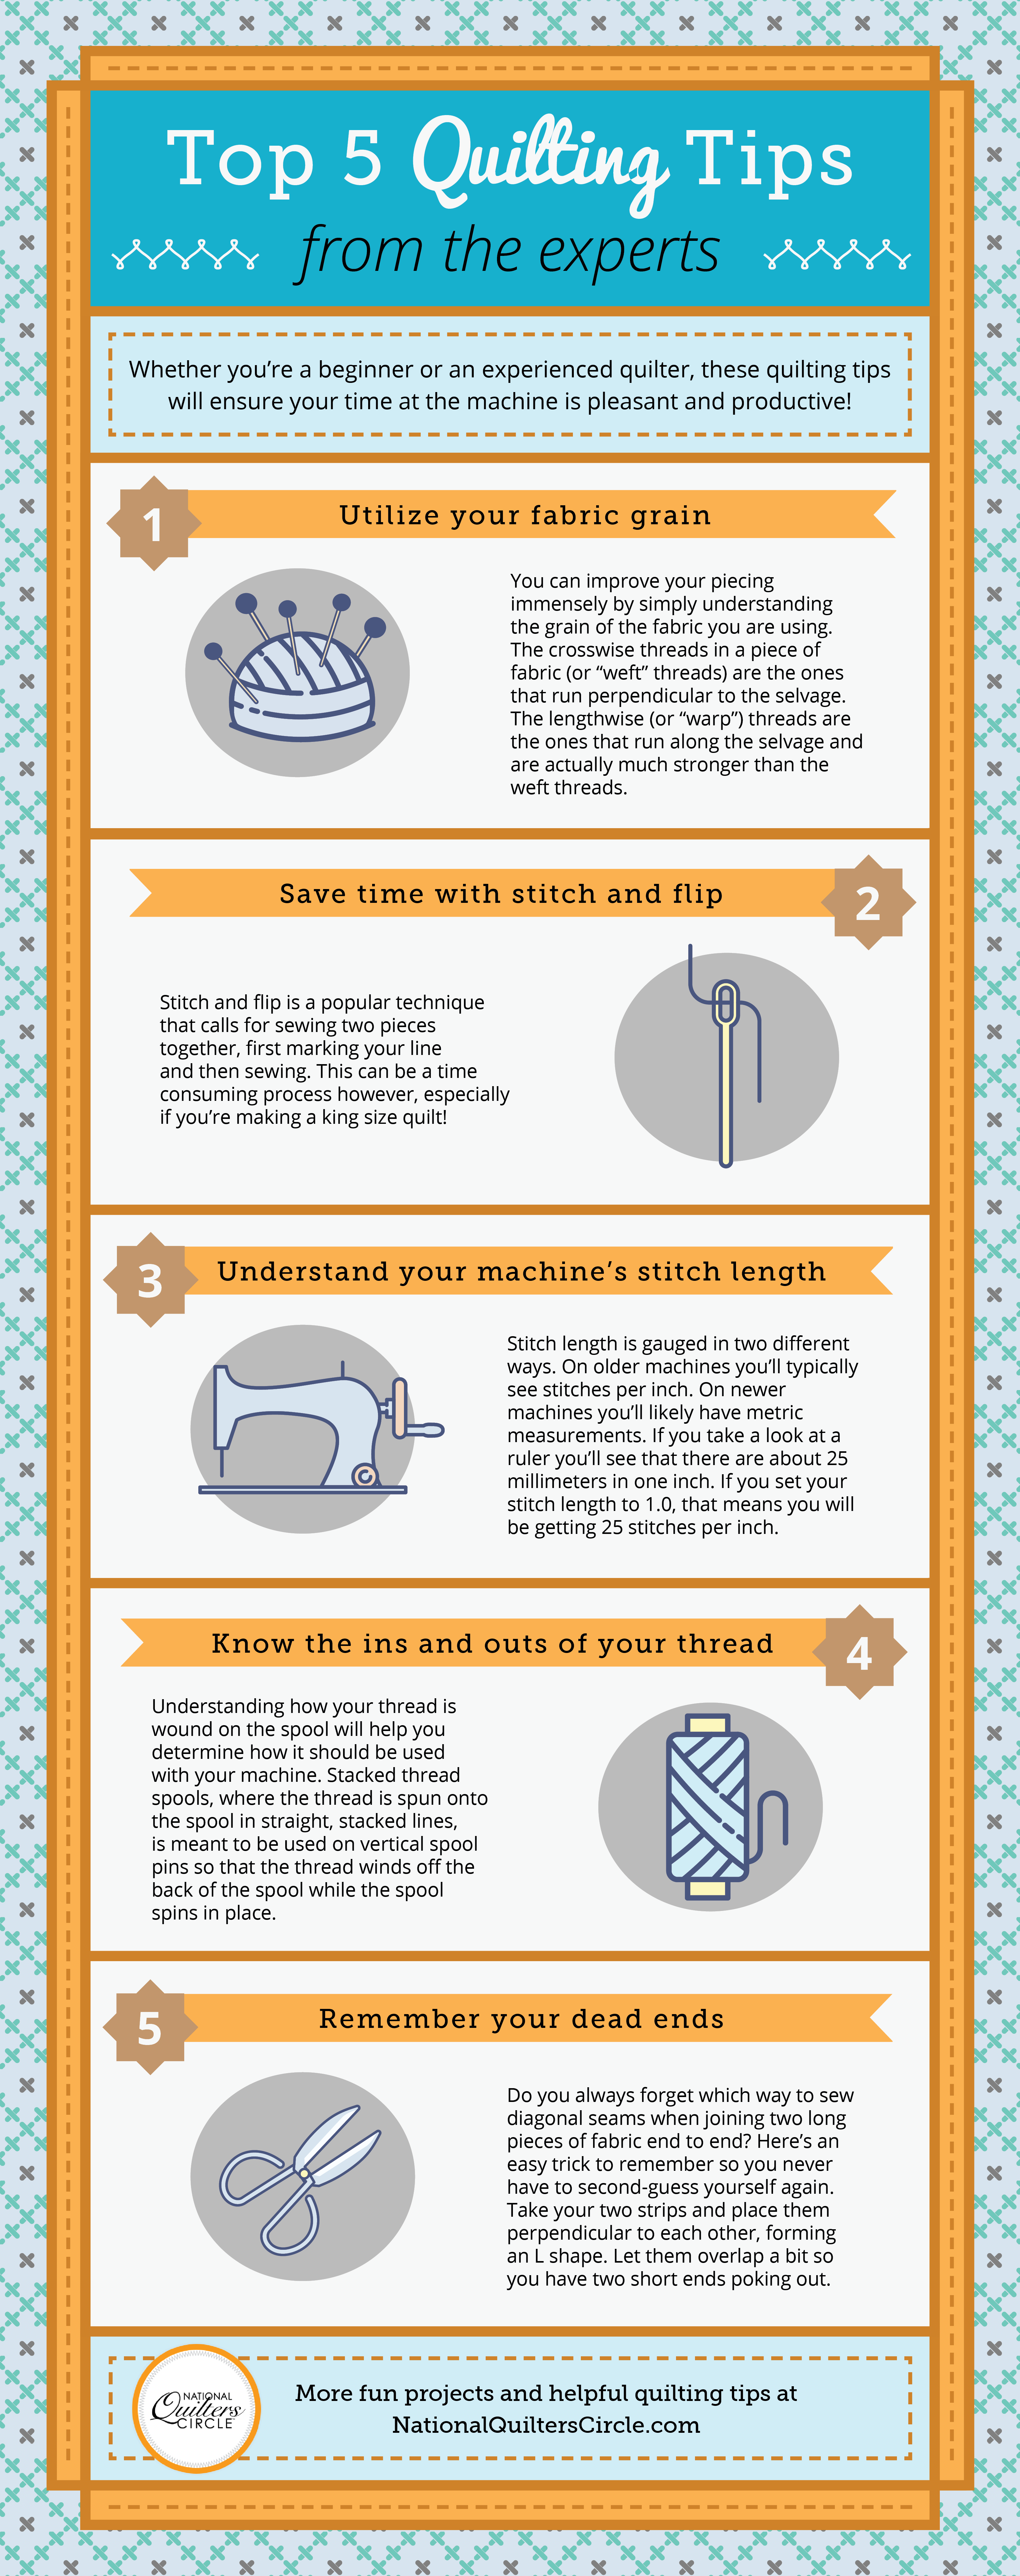 Quilting tips from experts infographic